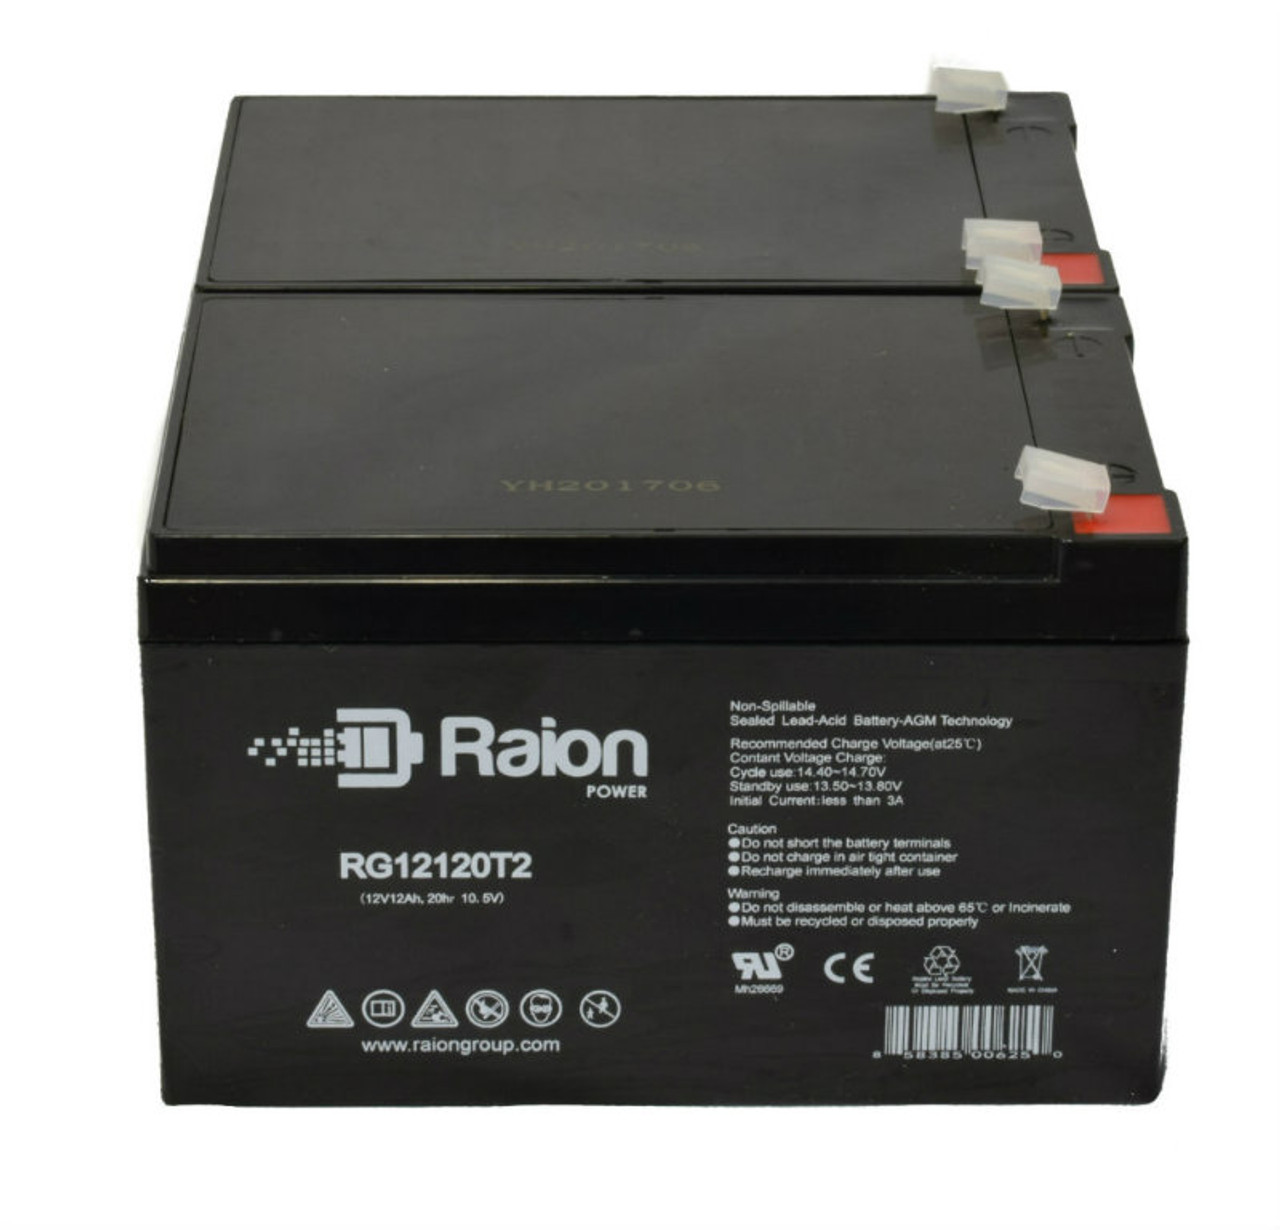 Raion Power RG12120T2 Replacement Fire Alarm Control Panel Battery for Altronix MAXIM37E - 2 Pack